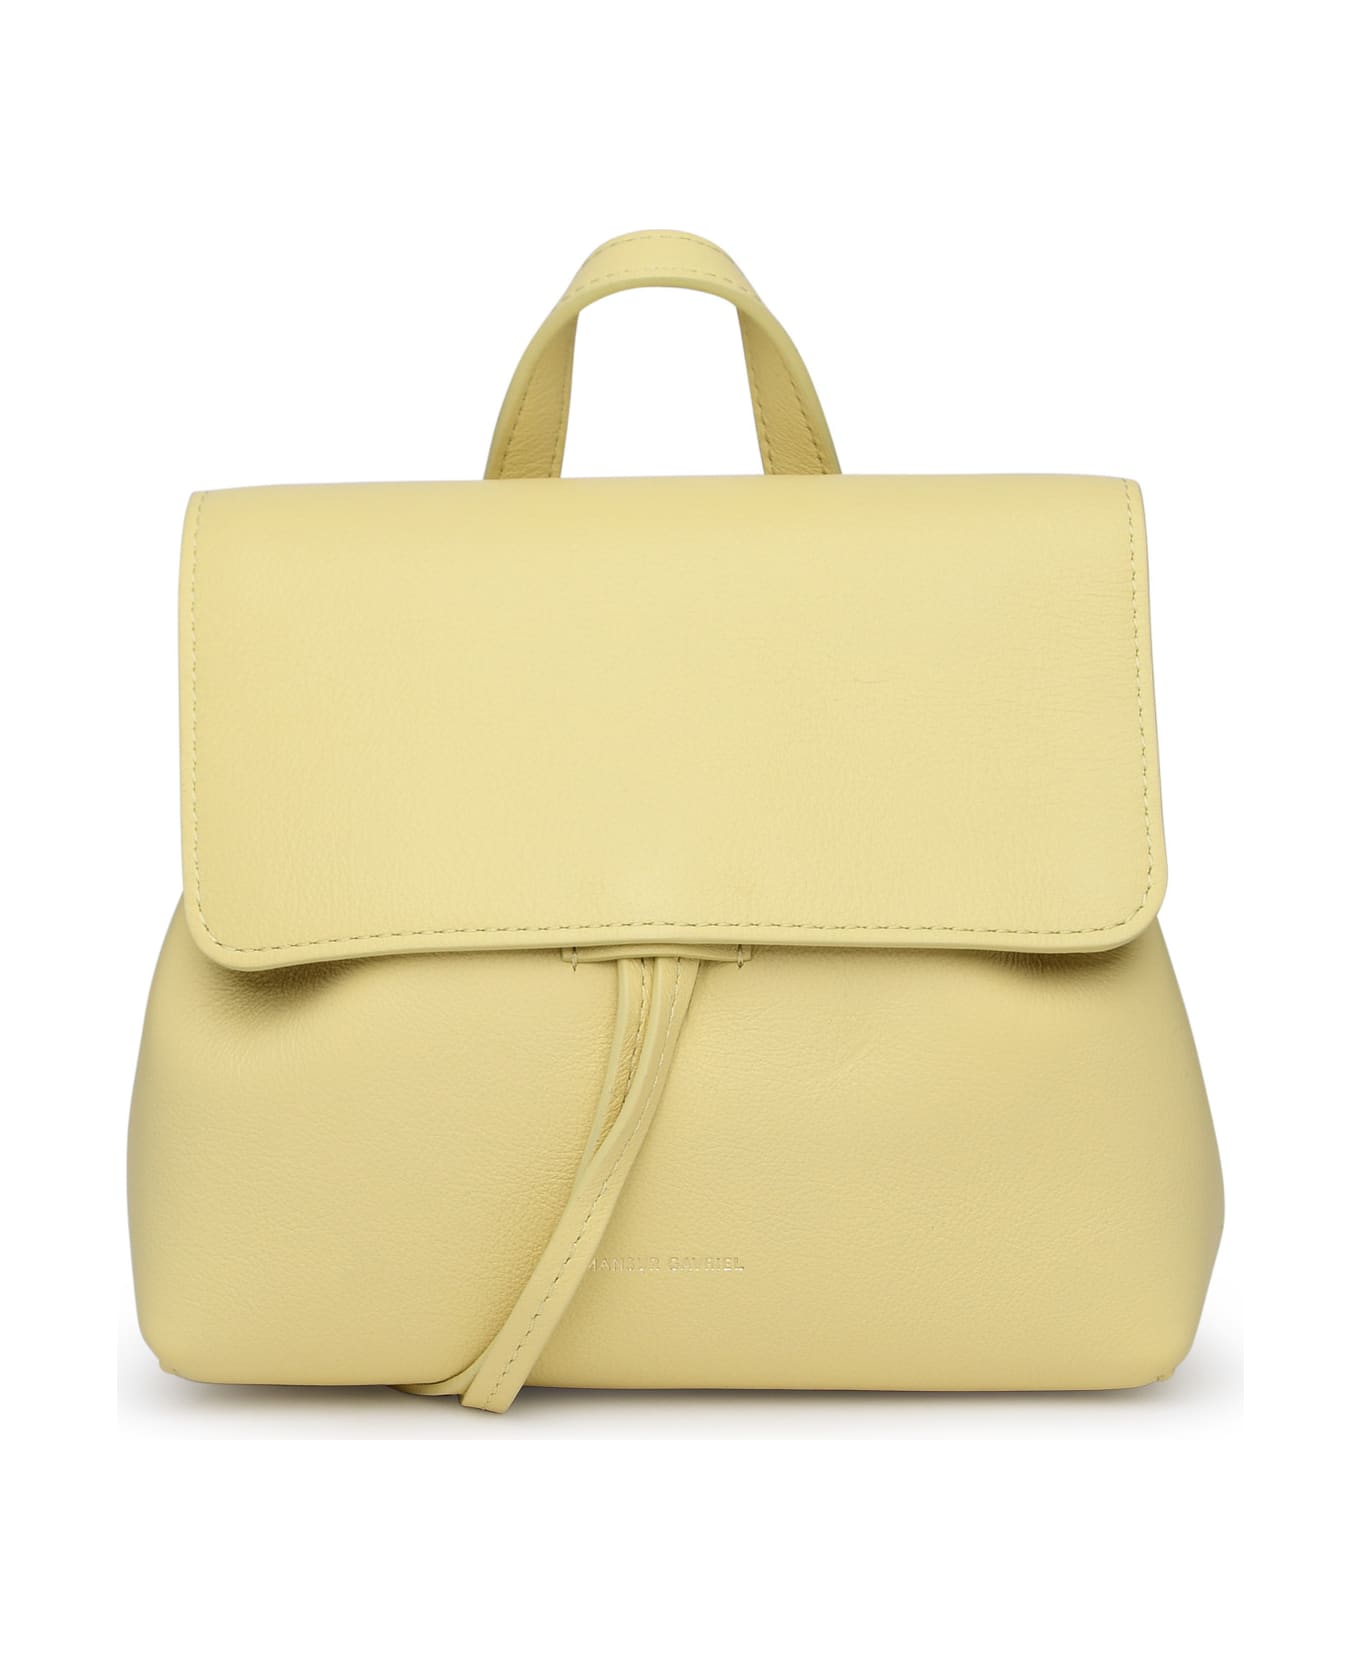 Mansur Gavriel Small 'lady Soft' Bag In Yellow Leather - Yellow